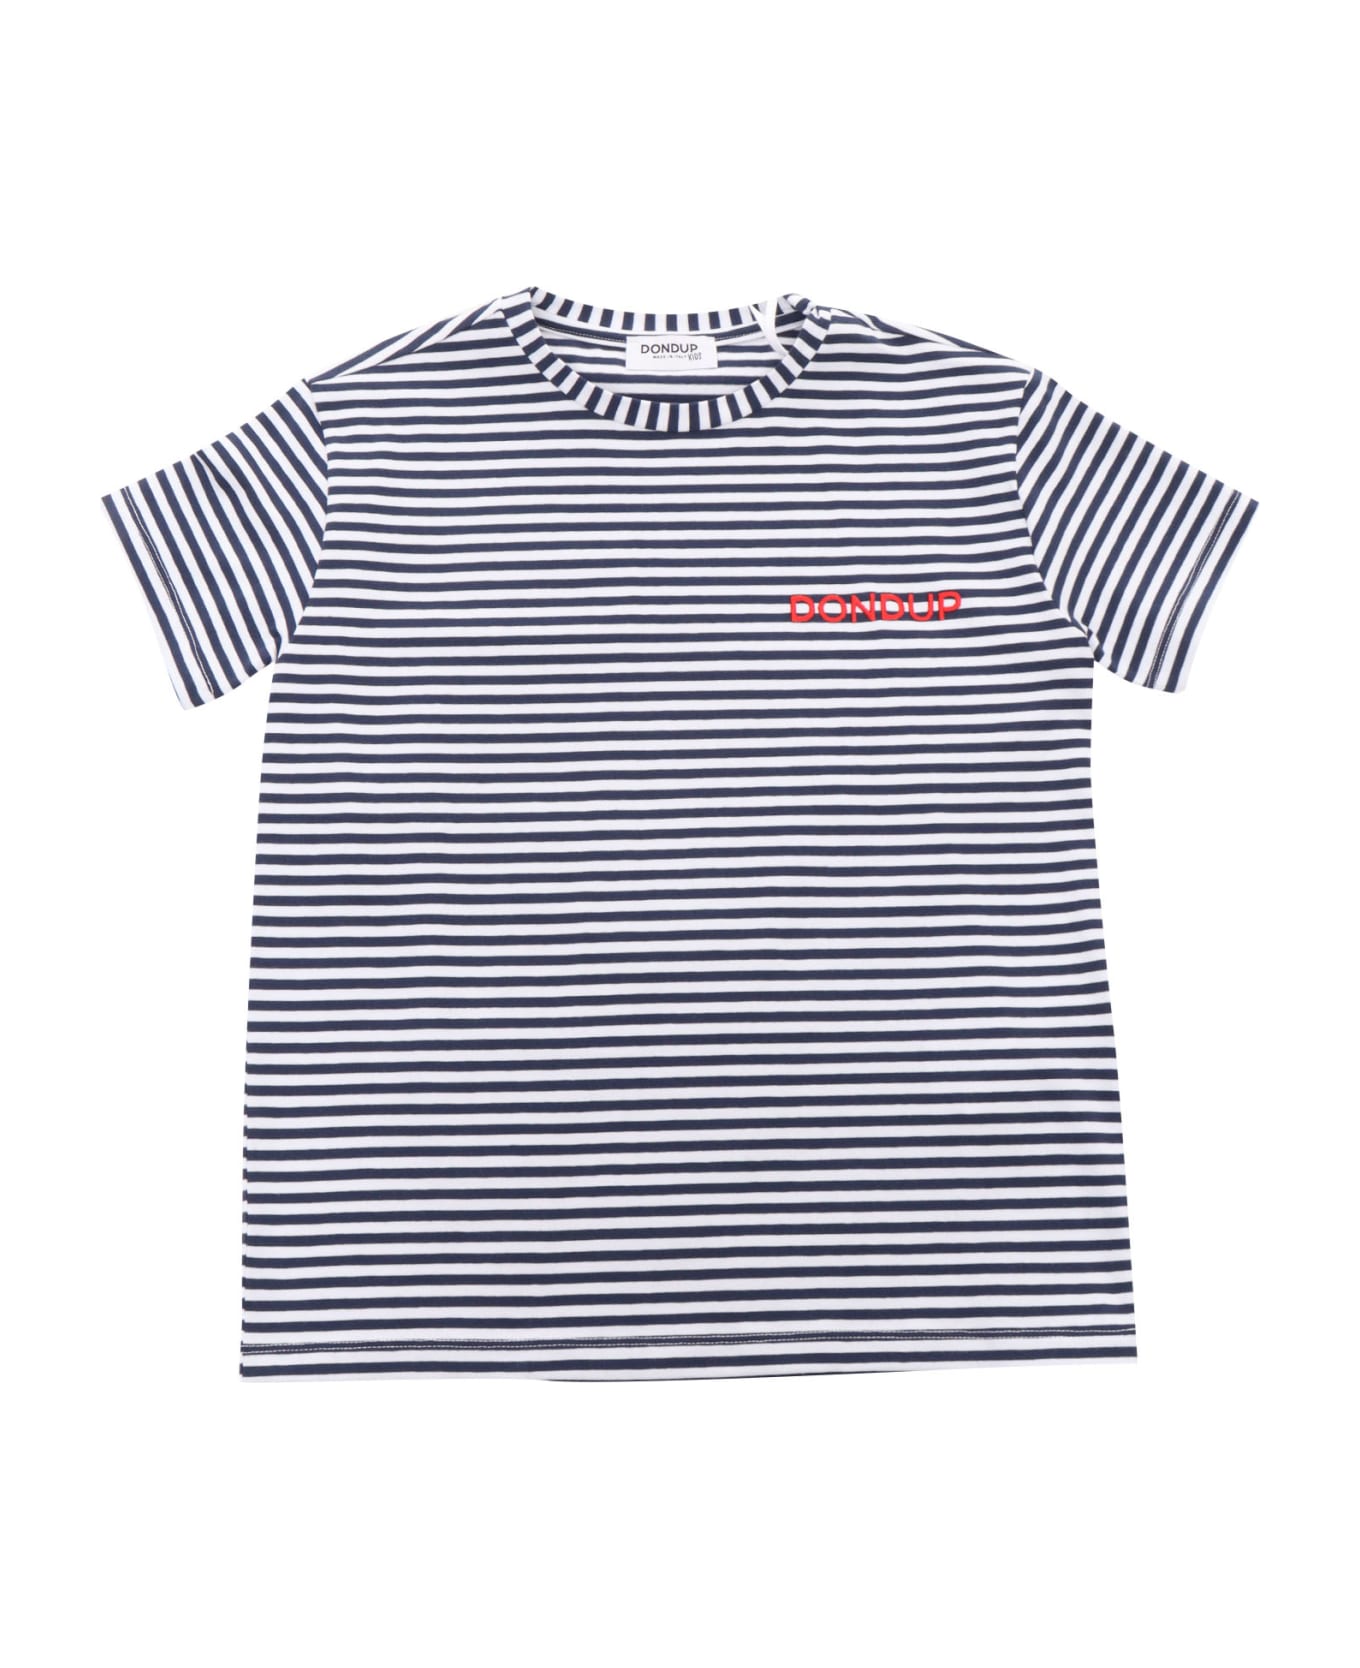 Dondup White And Blue Striped T-shirt - WHITE